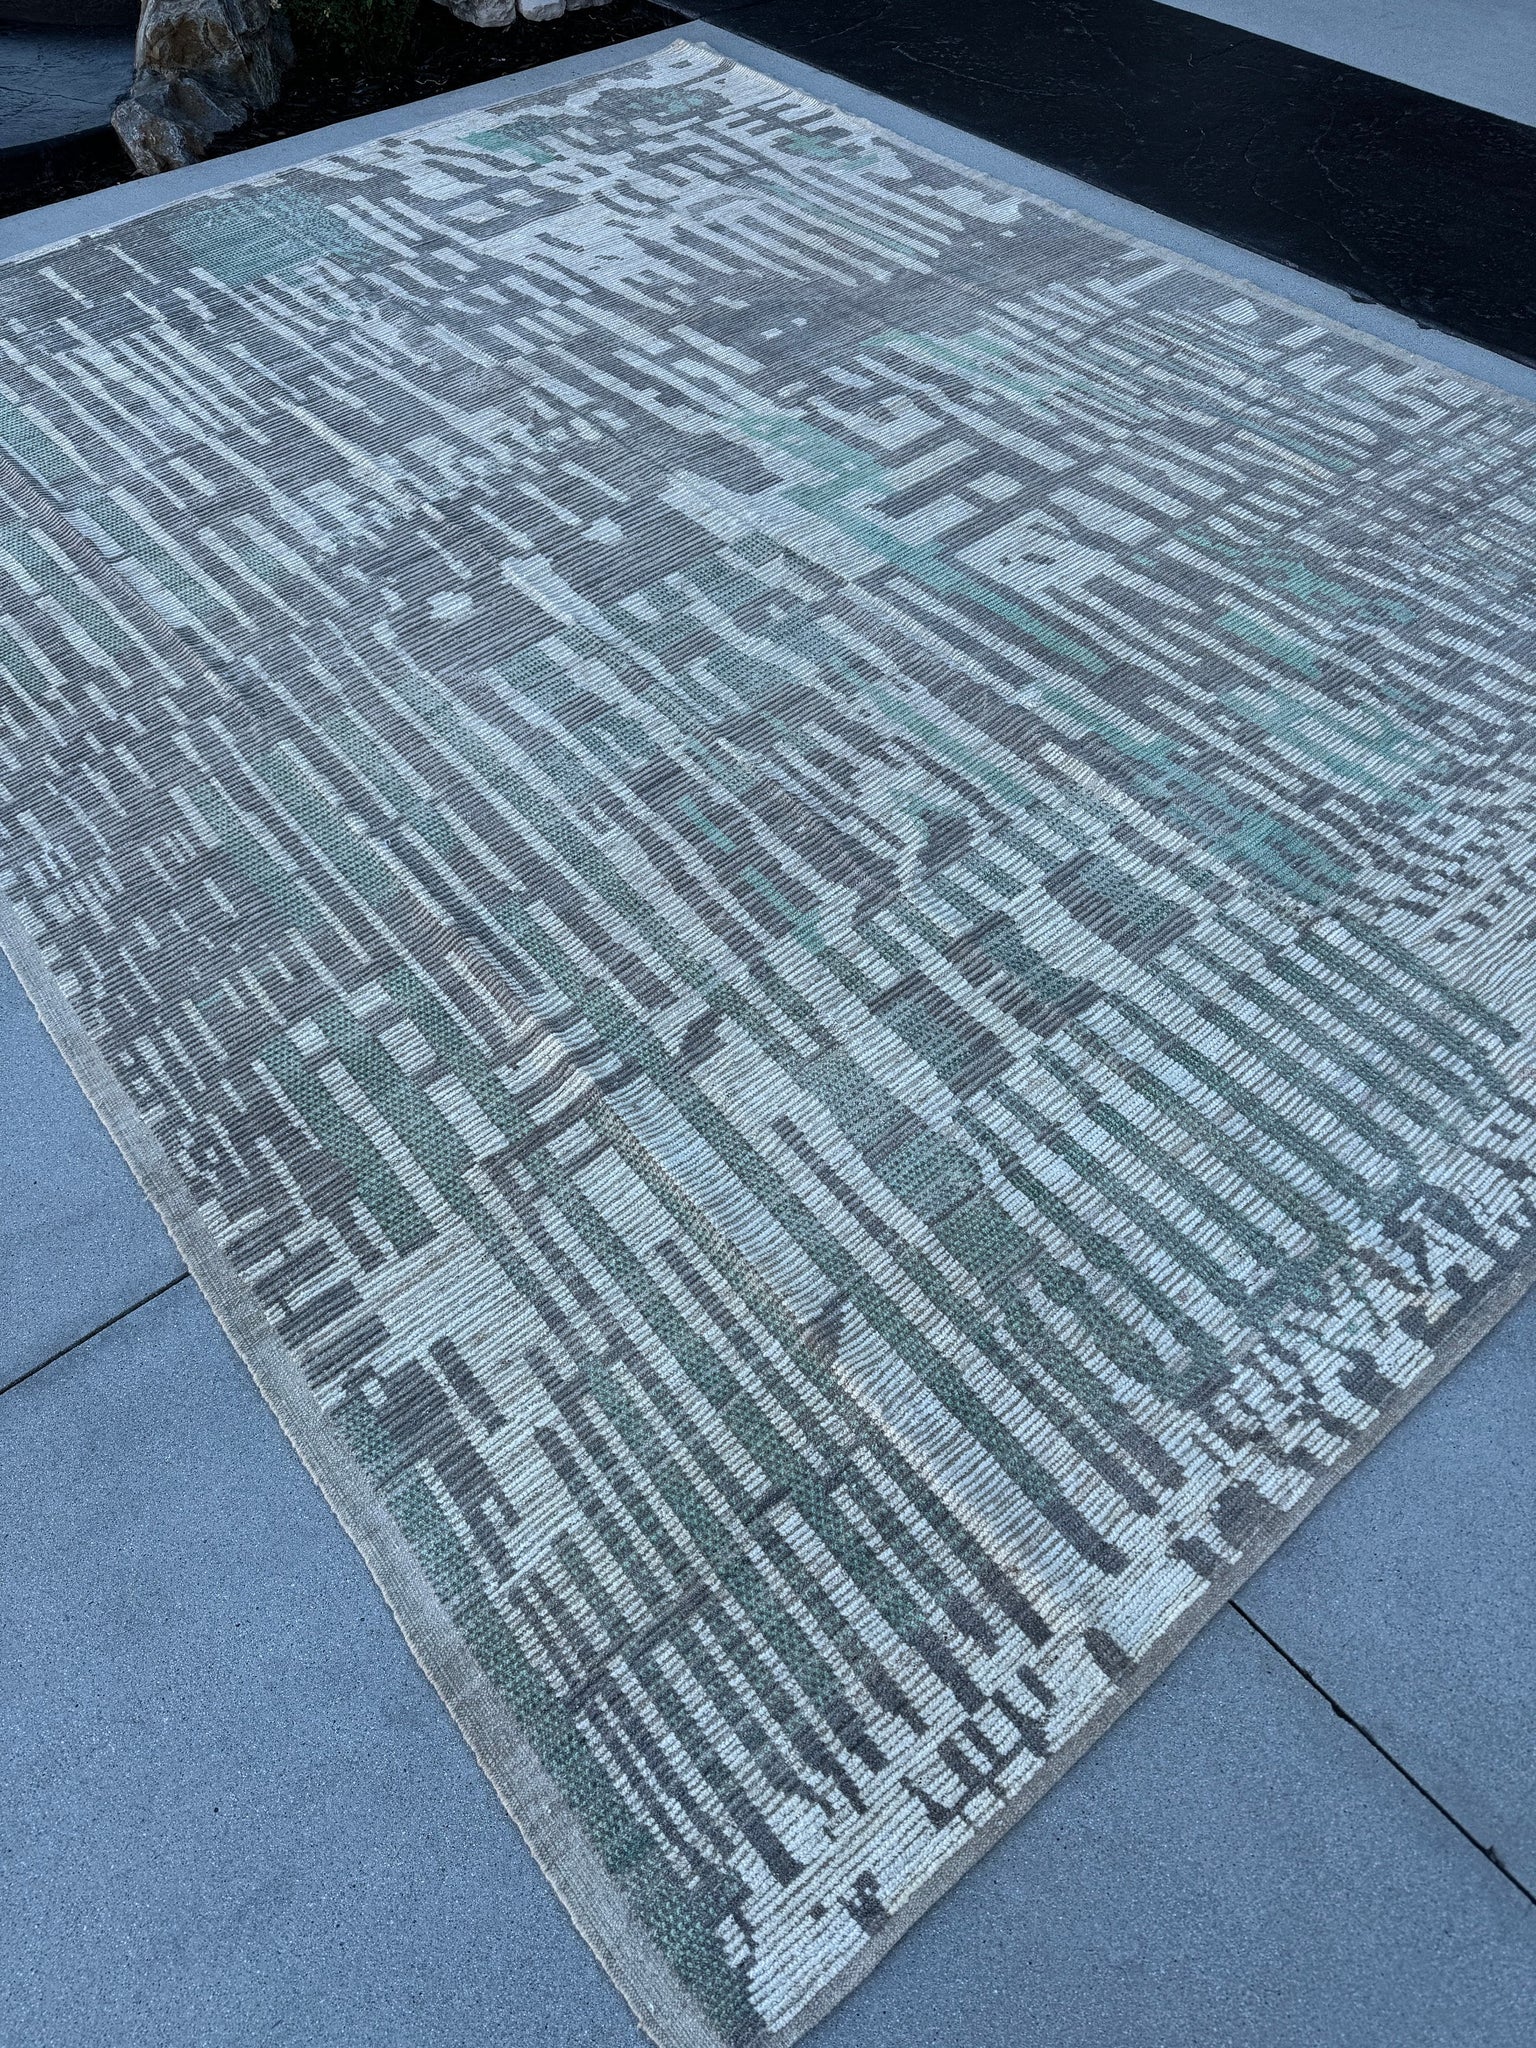 10x12-13 Handmade Afghan Moroccan Rug | Charcoal Grey Beige White Ivory Lime Green| Contemporary Wool Hand Knotted